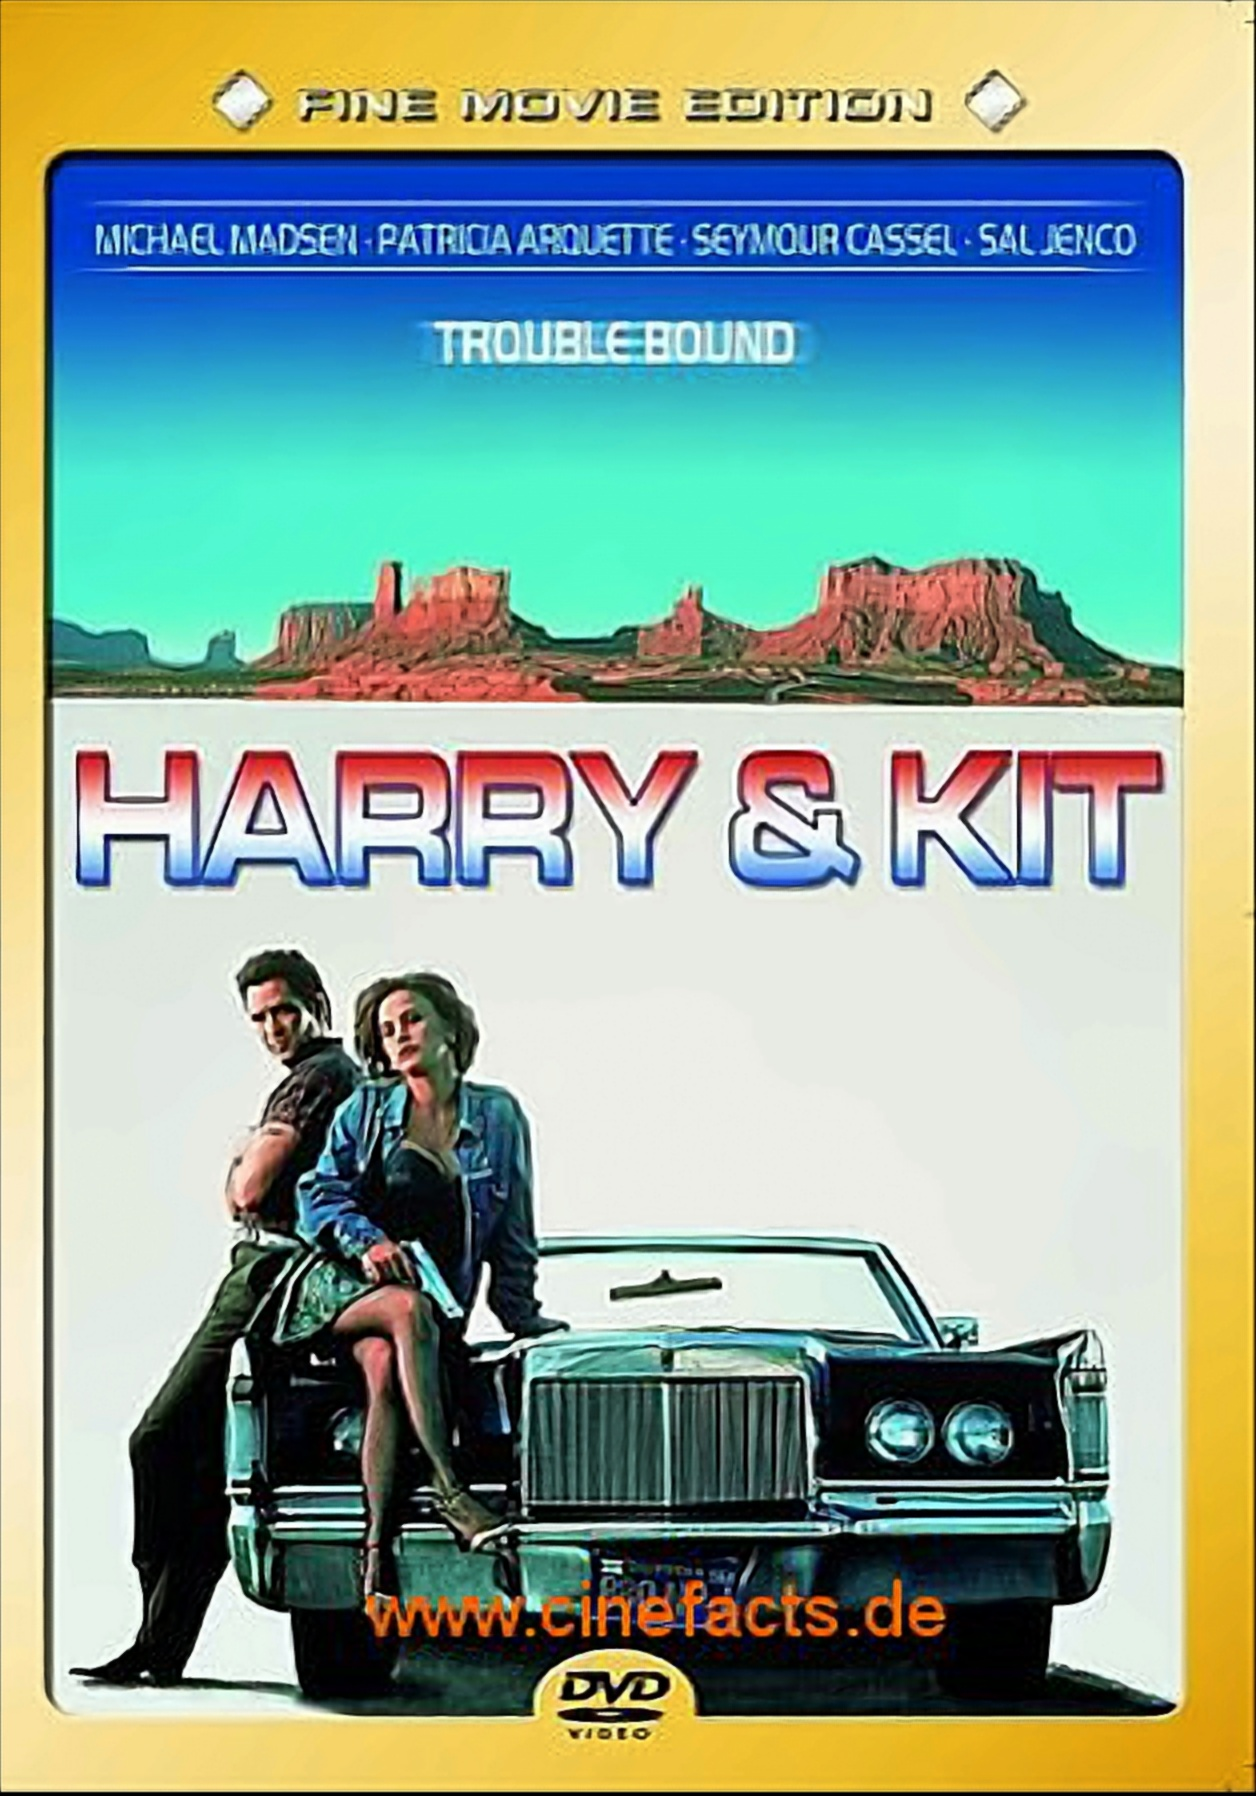 Harry & Kit - Bound DVD Trouble